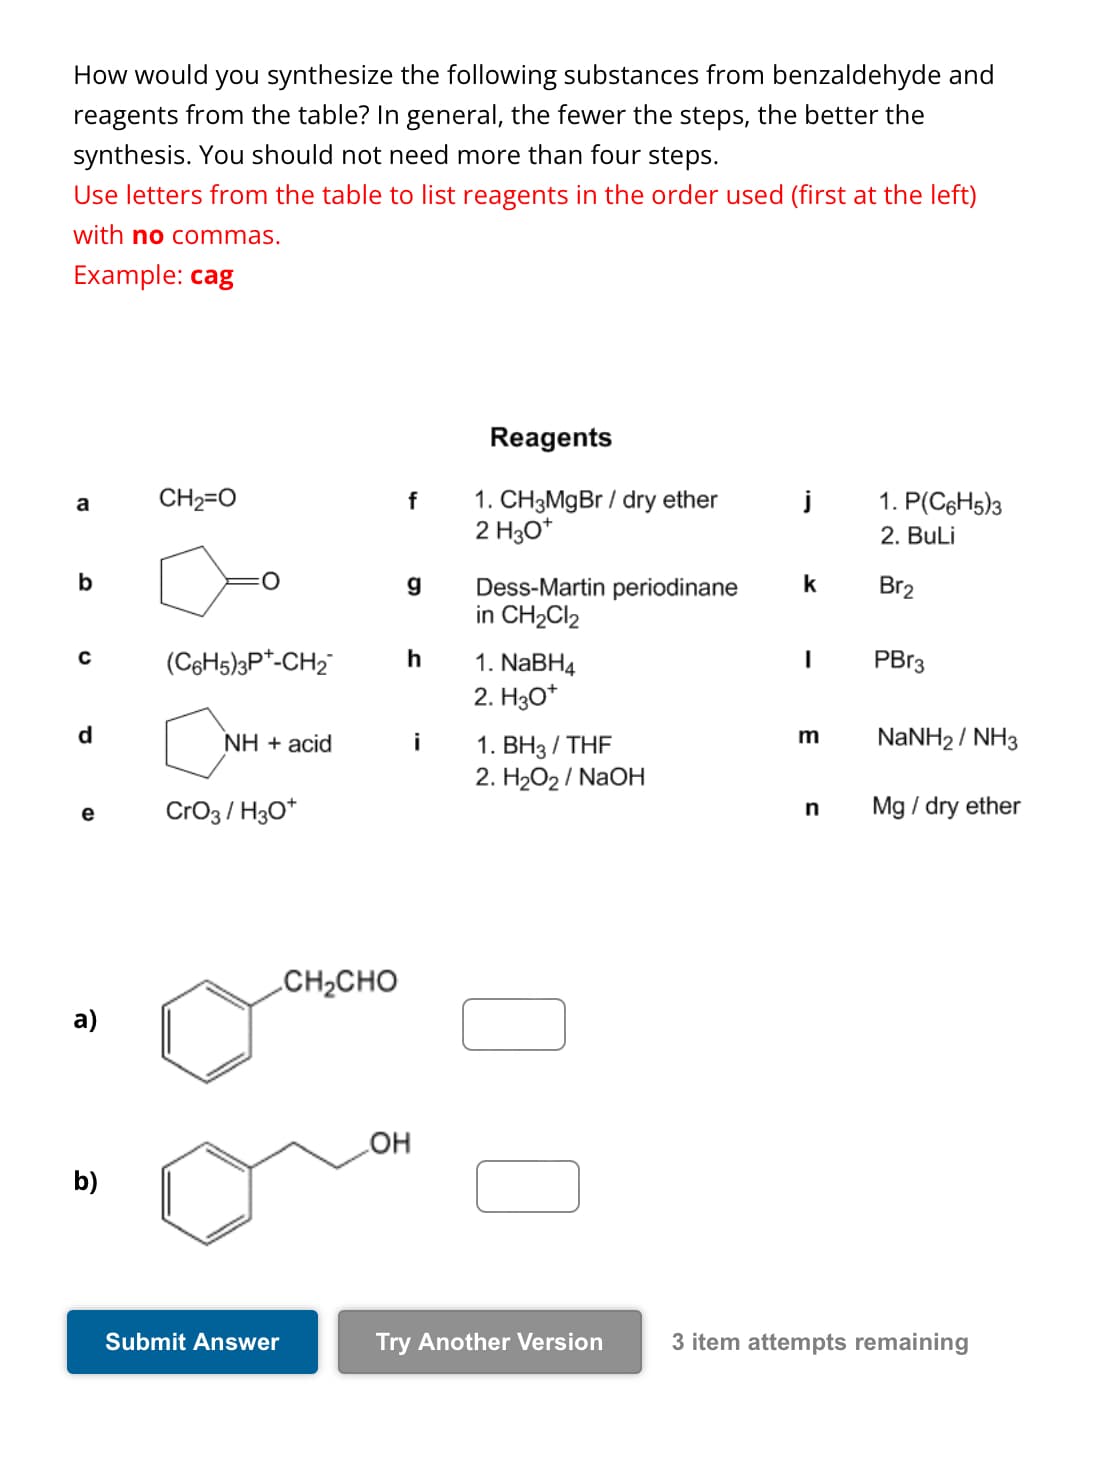 How would you synthesize the following substances from benzaldehyde and
reagents from the table? In general, the fewer the steps, the better the
synthesis. You should not need more than four steps.
Use letters from the table to list reagents in the order used (first at the left)
with no commas.
Example: cag
Reagents
a
CH2=O
f
1. CH3MgBr/dry ether
2 H3O+
1. P(C6H5)3
2. BuLi
b
g
Dess-Martin periodinane
k
Br2
in CH2Cl2
C
(C6H5)3P+-CH2
h
1. NaBH4
I
PBr3
2. H3O+
m
d
NH + acid
i
1. BH3/THF
NaNH2/NH3
2. H2O2/NaOH
e
CrO3/H3O+
n
Mg / dry ether
a)
CH2CHO
OH
b)
Submit Answer
Try Another Version
3 item attempts remaining